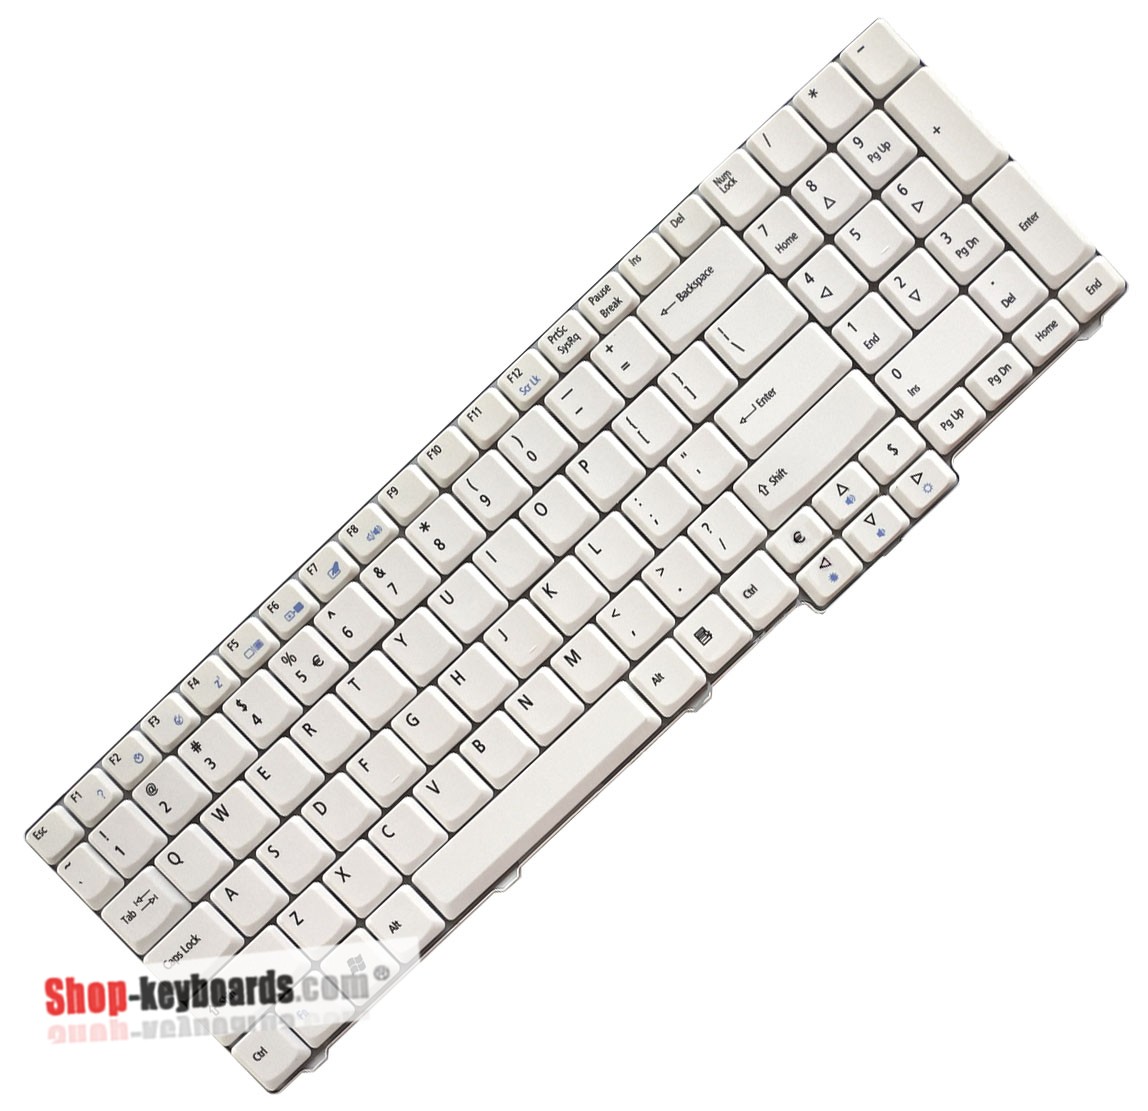 Acer Aspire 8730G-6042 Keyboard replacement